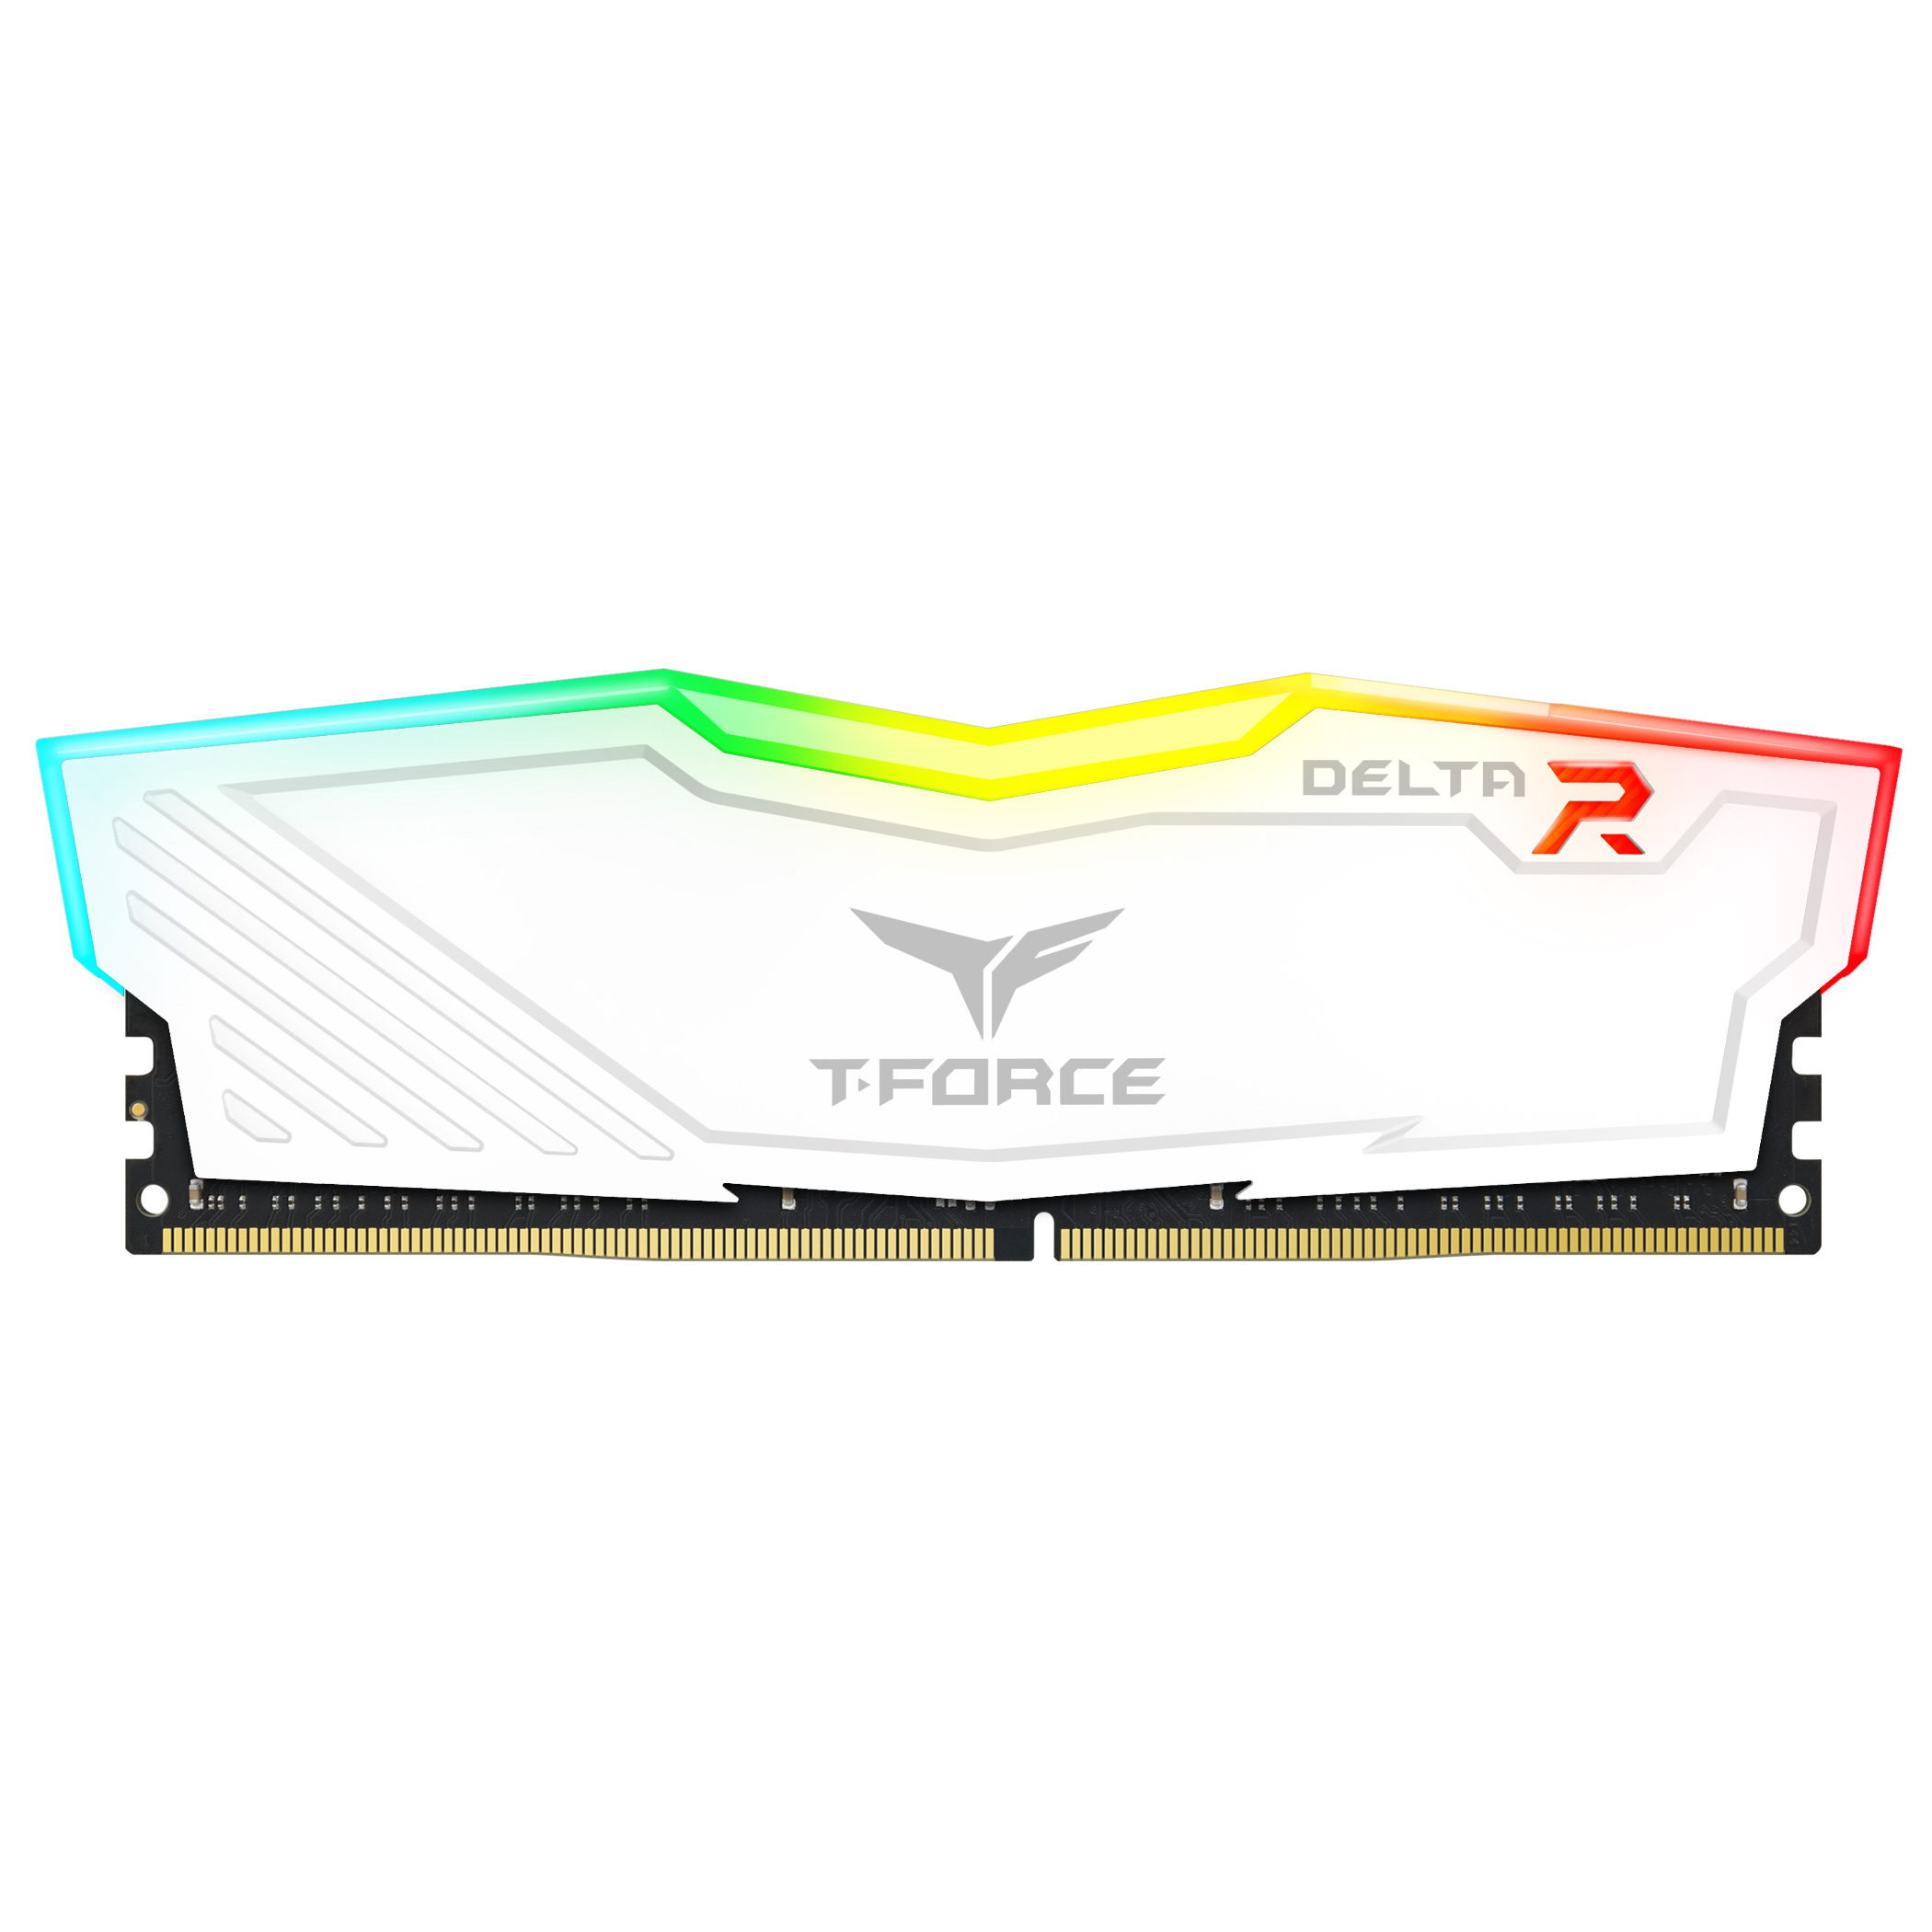 Оперативная память ddr4 3200mhz 2x16gb. T Force 16 GB ddr4 3200mhz. DIMM TEAMGROUP T-Force Delta RGB 32gb. Оперативная память 16gb ddr4 3200mhz Team t-Force Delta RGB (tf3d416g3200hc16cdc01) (2x8gb Kit). Оперативная память 16 ГБ 1 шт. Team Group tf4d416g2400hc15b01.